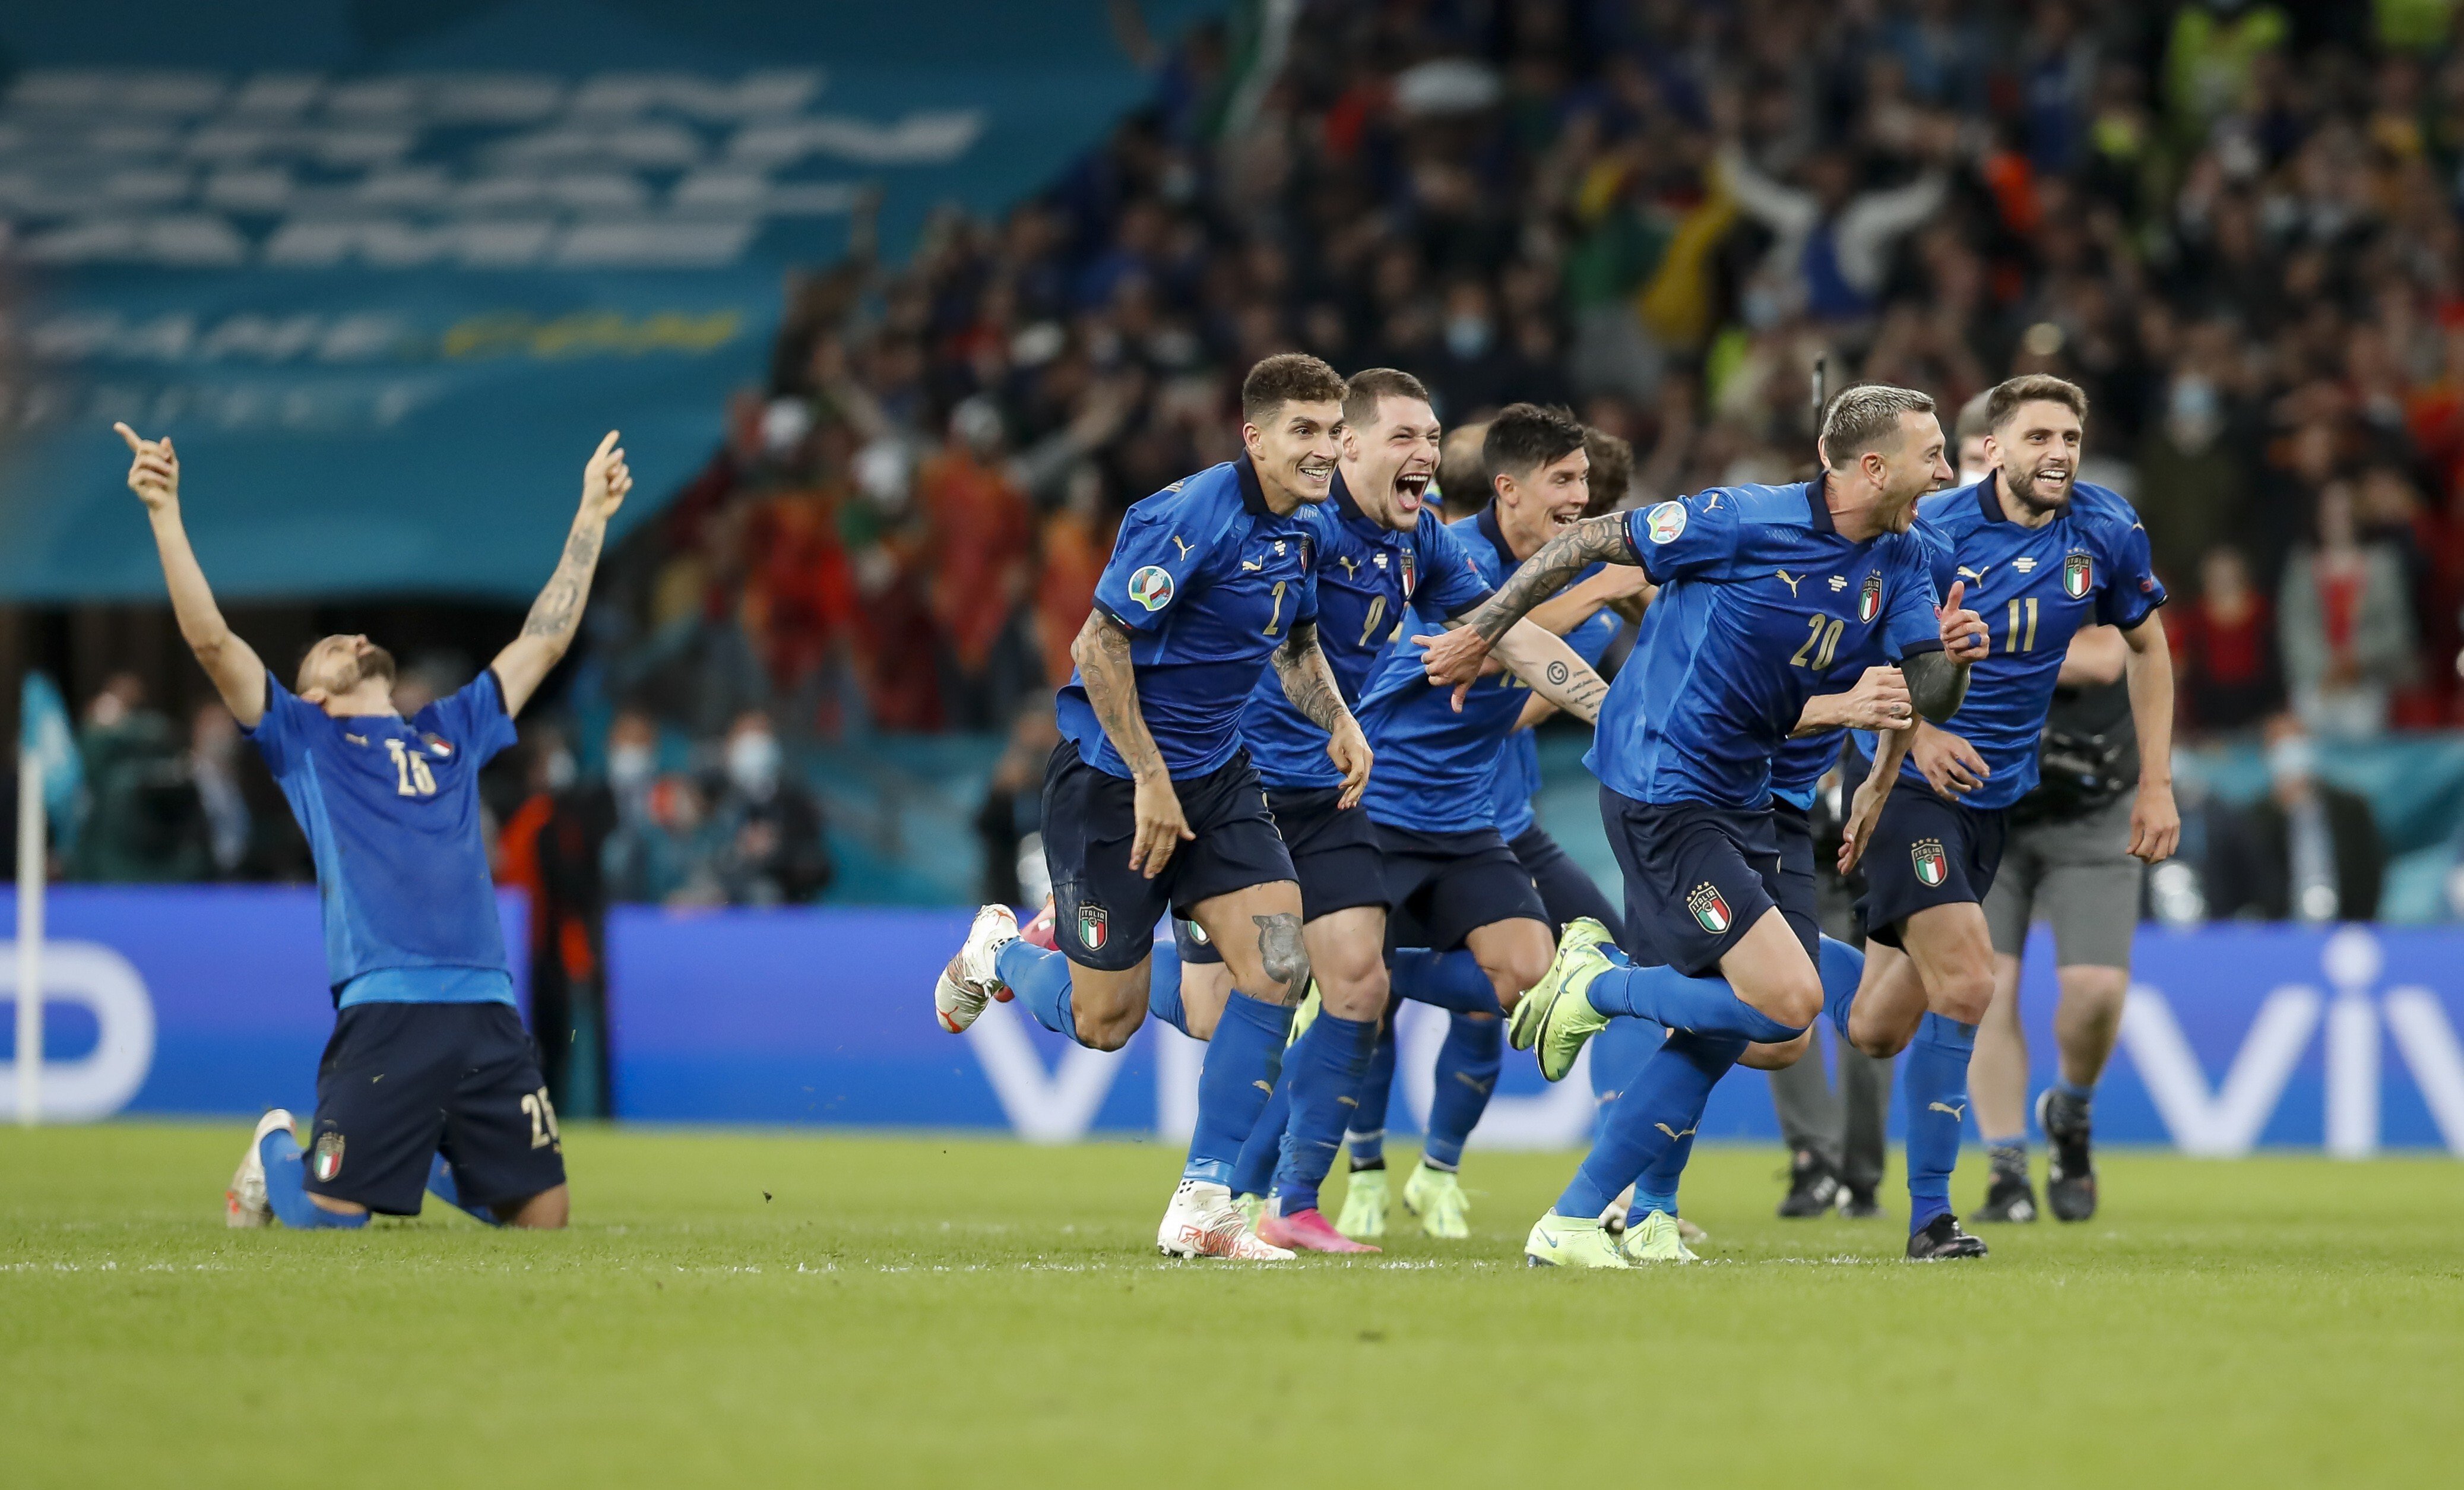 Italy celebrate after beating Spain at Wembley to reach the Euro 2020 final. Photo: Xinhua